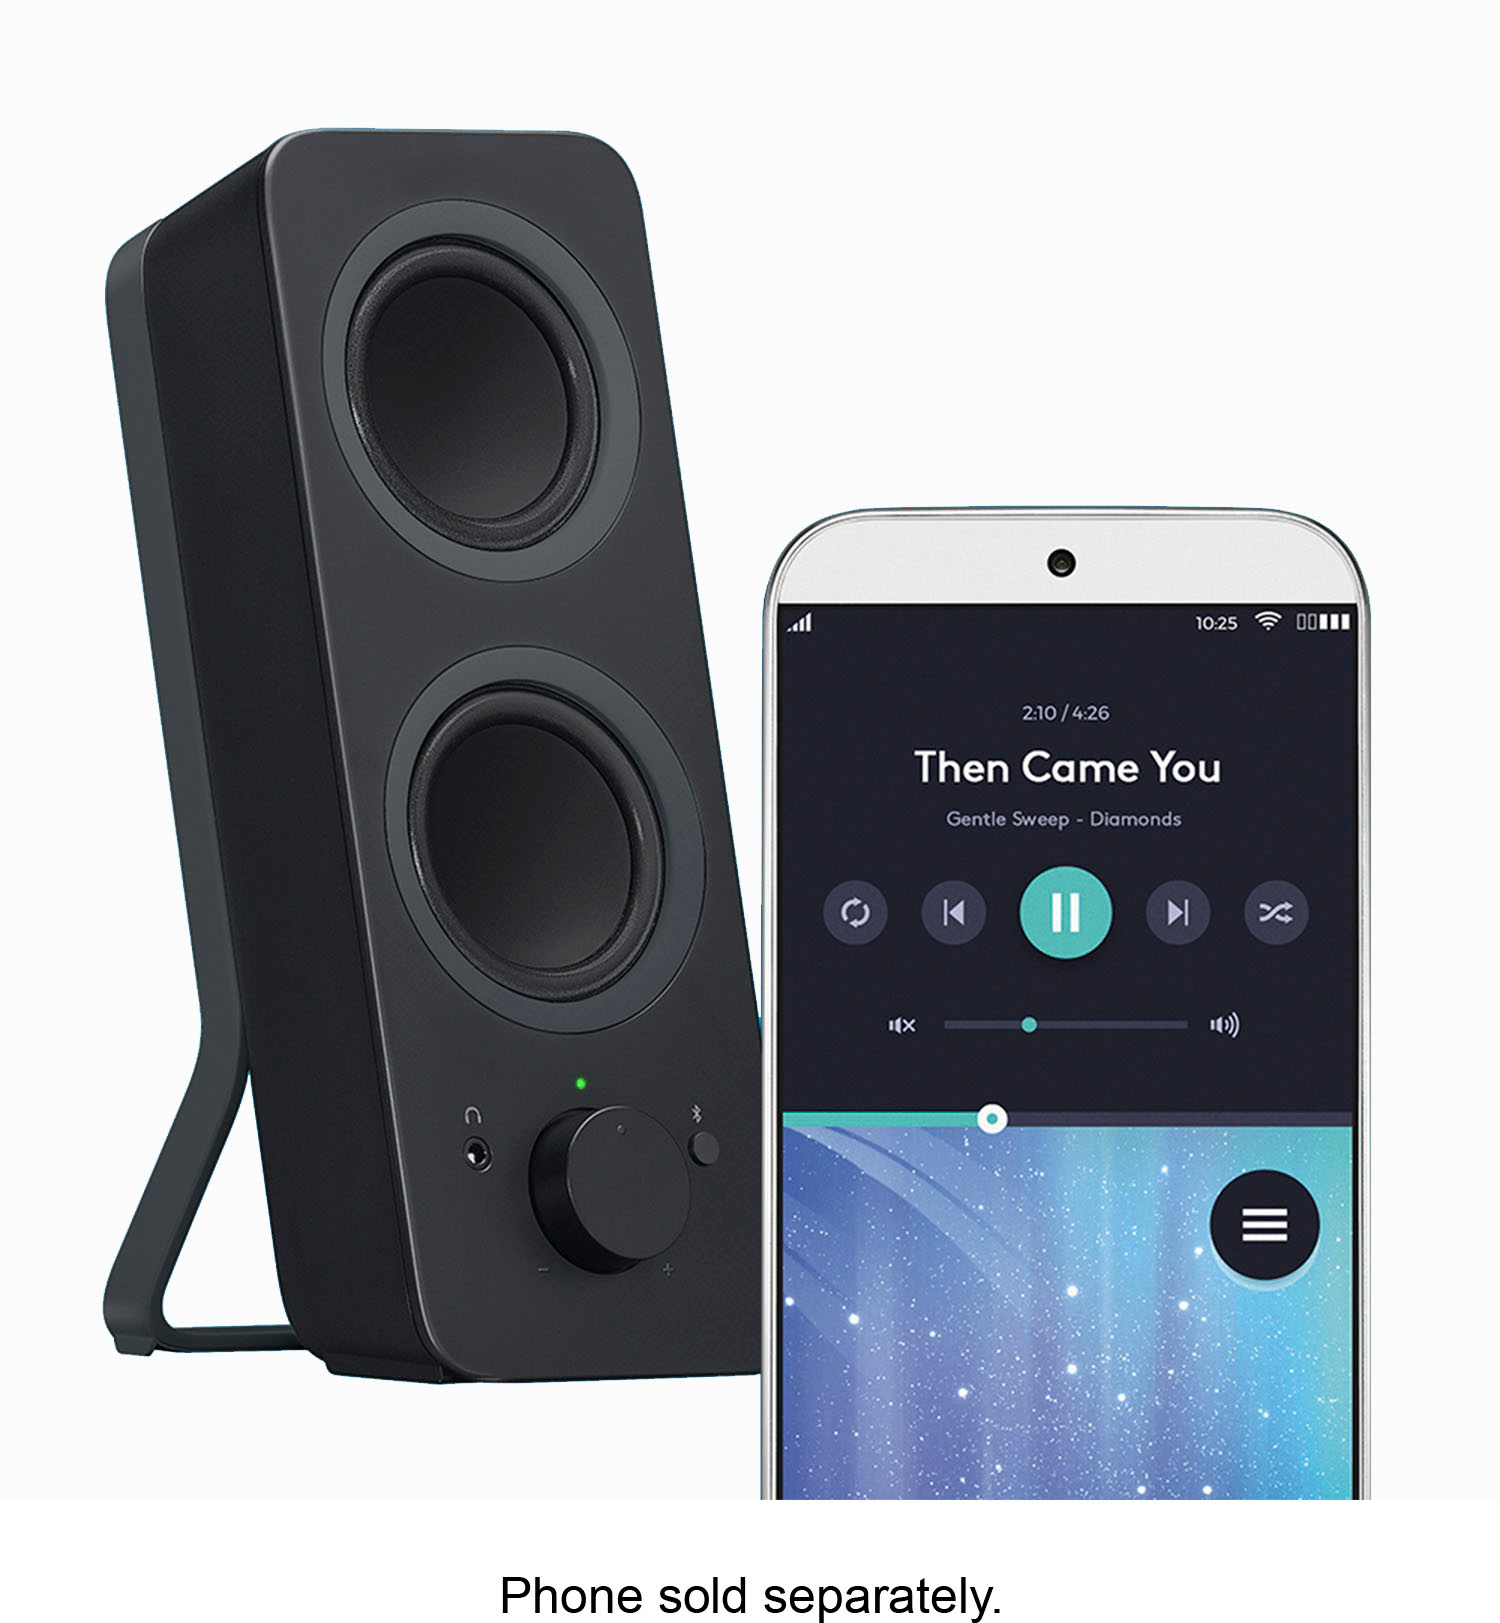 Logitech Z207 2.0 Stereo Computer Speakers with Bluetooth